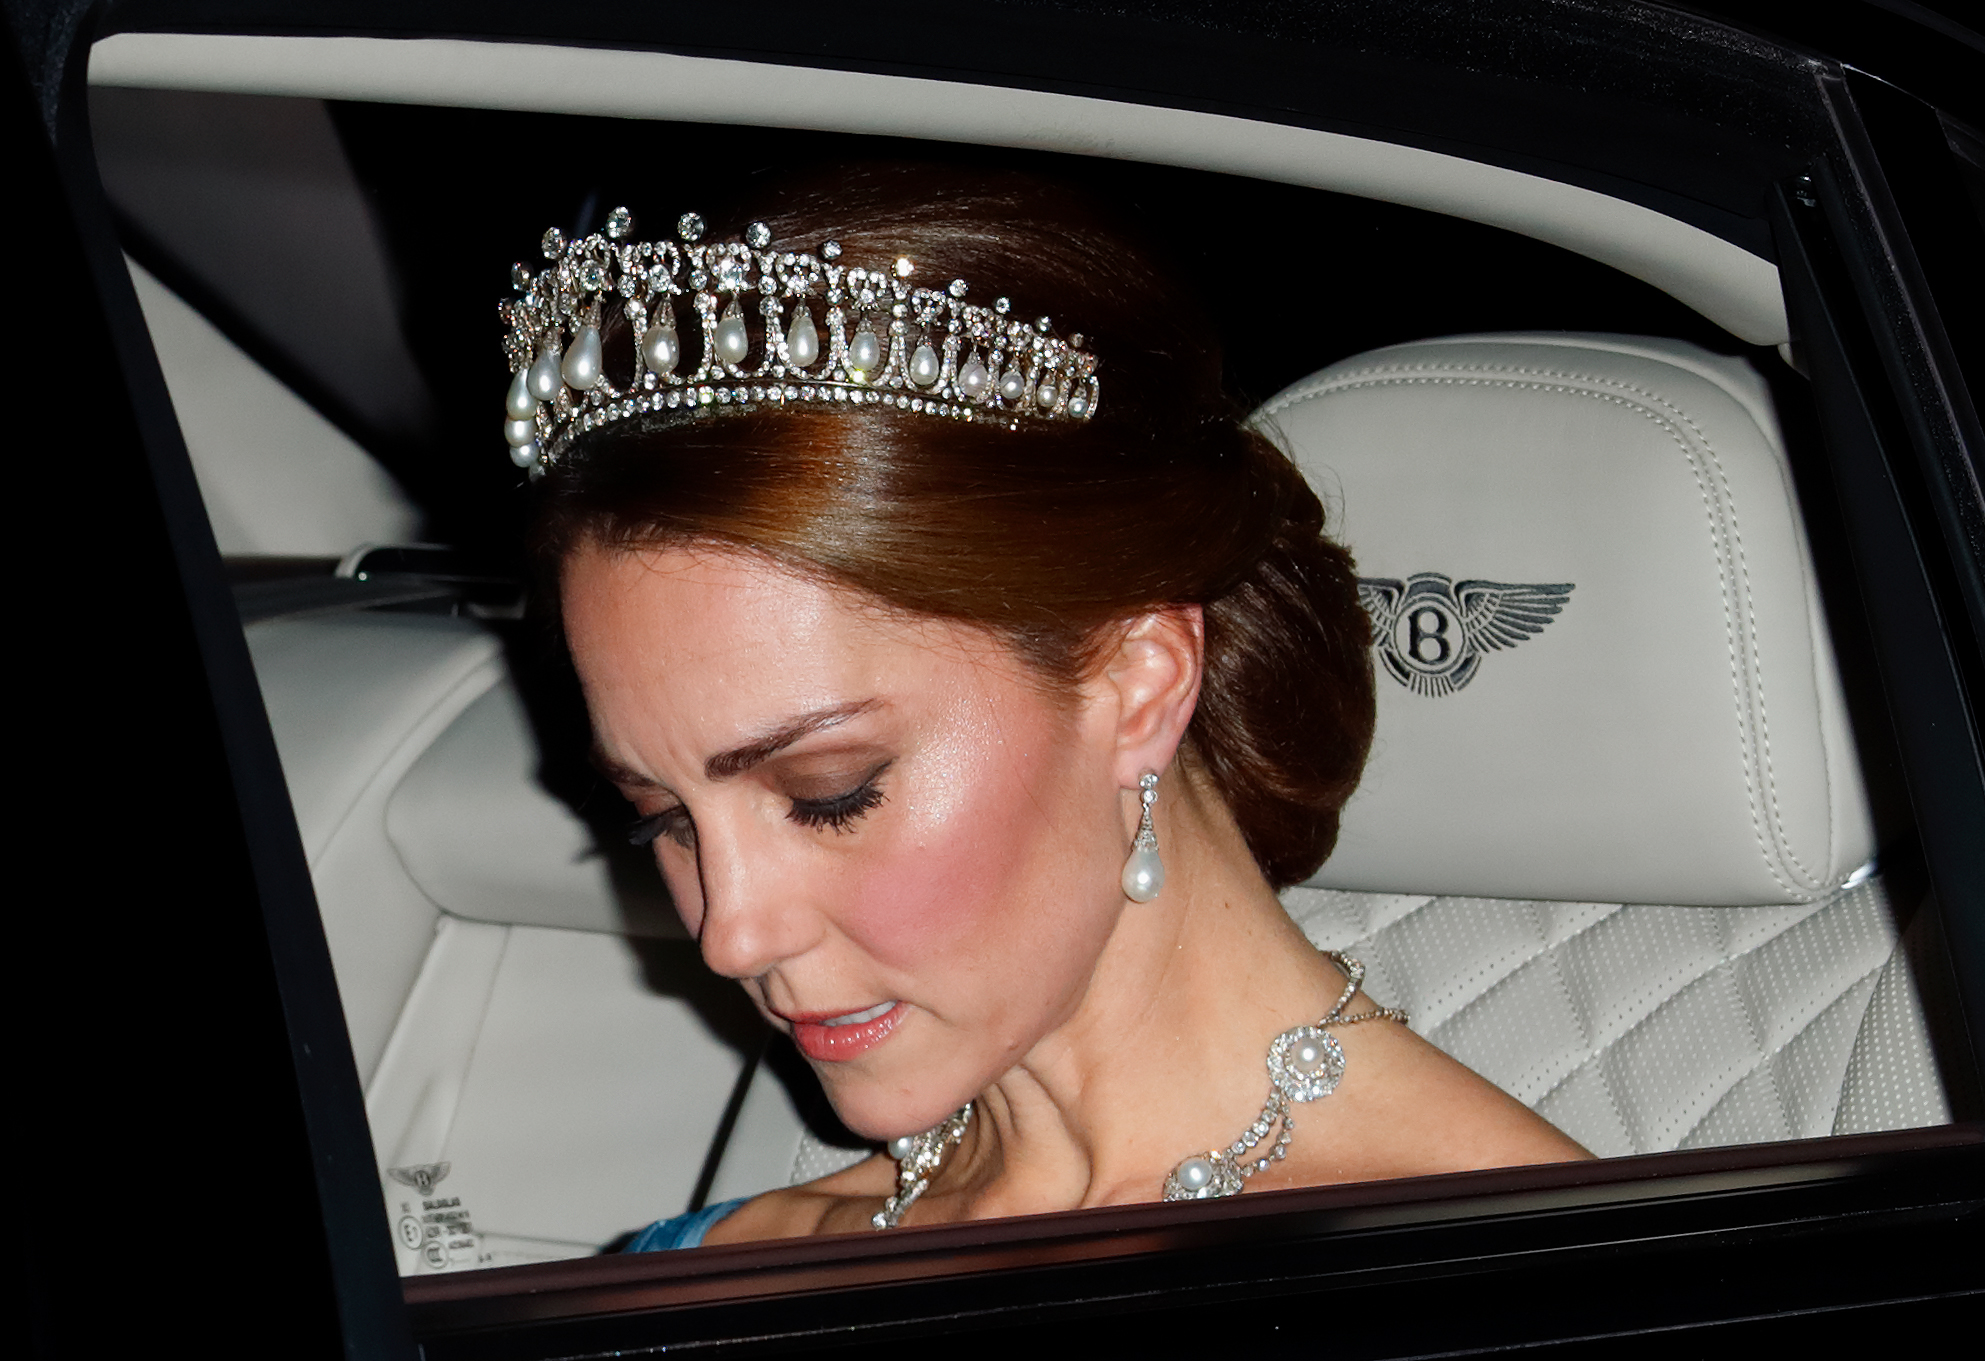 Catherine, Duchess of Cambridge departs Kensington Palace to attend a State Banquet at Buckingham Palace in London, United Kingdom, on October 23, 2018. | Source: Getty Images